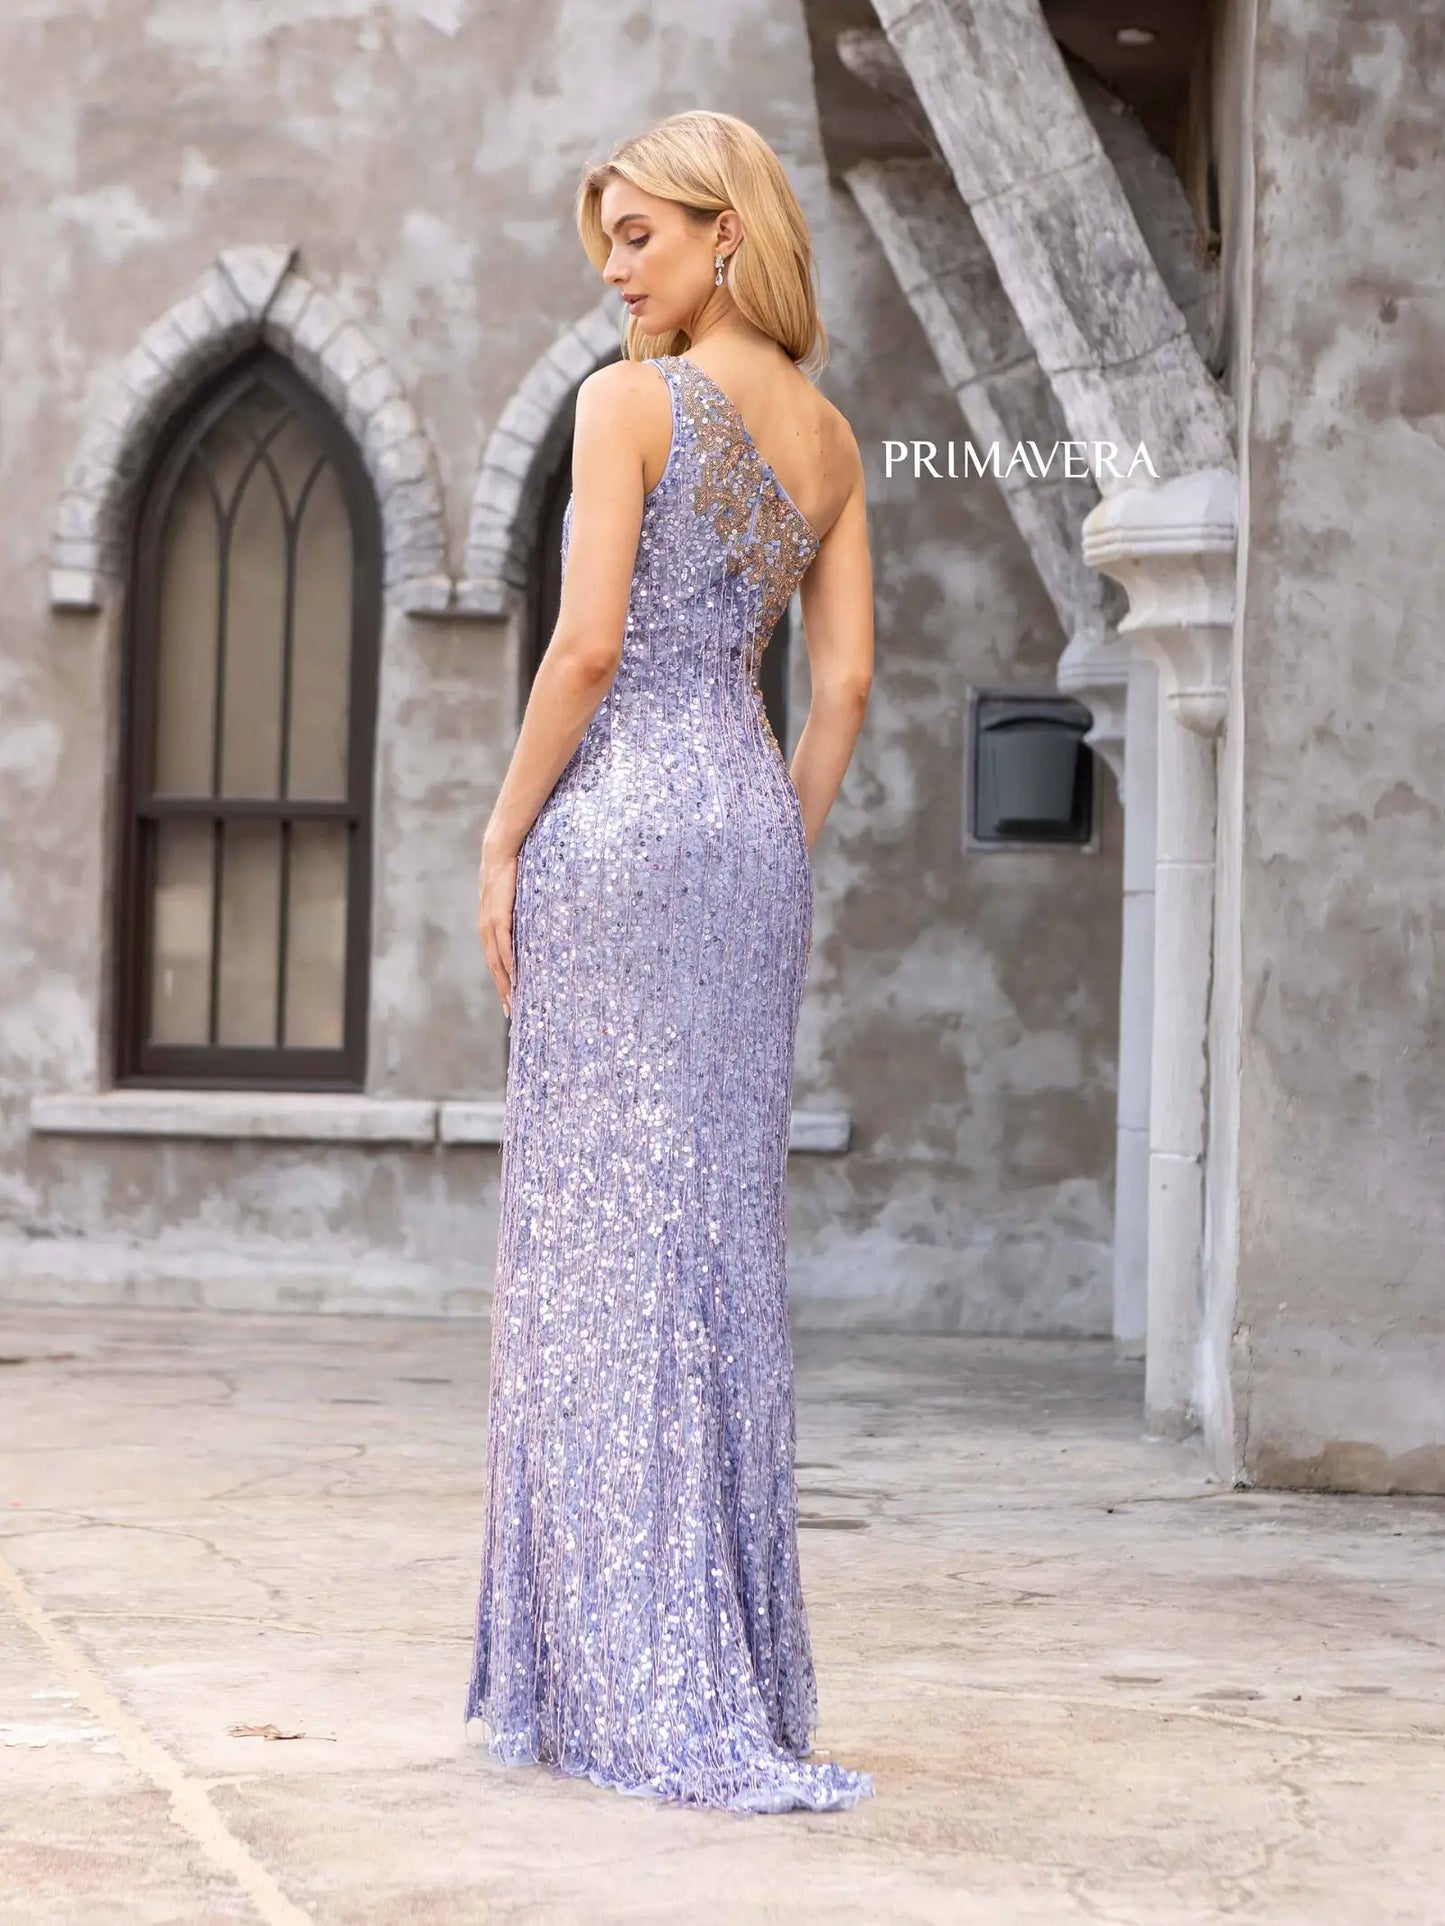 Primavera Couture 3906 Long Fitted Beaded Fringe Sequin Prom Dress One Shoulder Slit Formal Gown  Sizes: 000-24  Colors: Sage Green, Neon Pink, Orange, Lilac, Ivory, Black